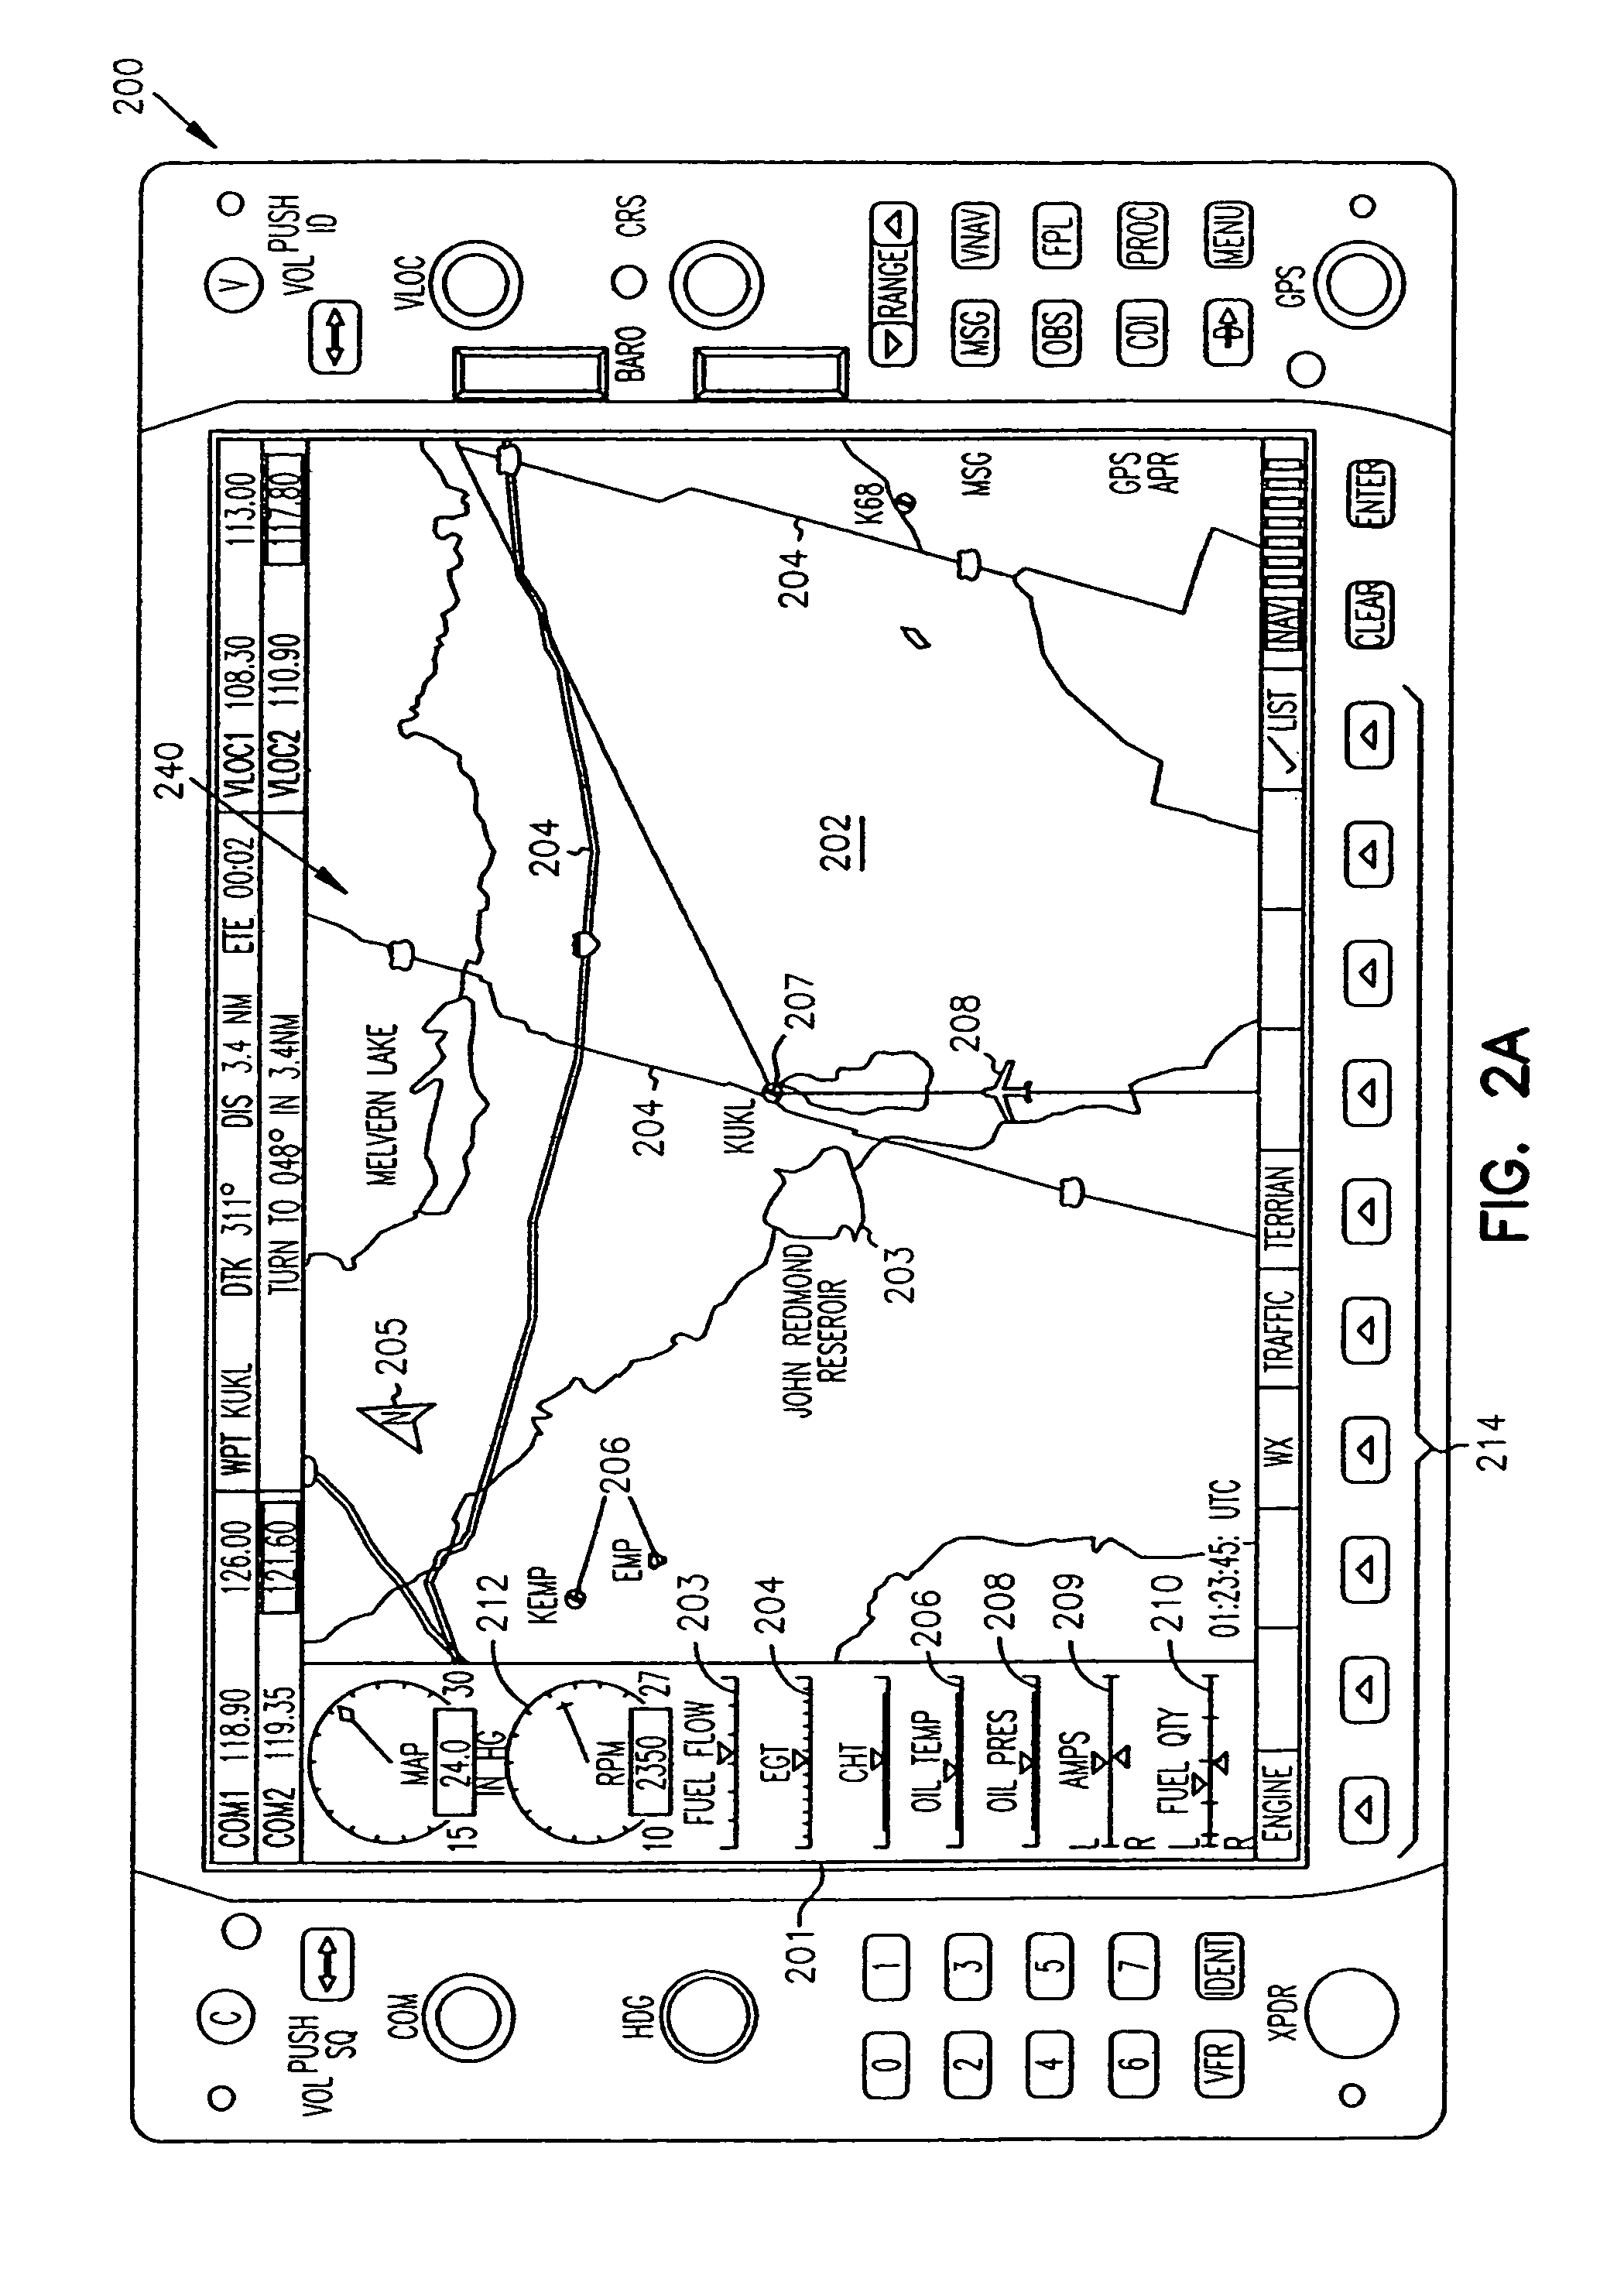 Cockpit instrument panel systems and methods with redundant flight data display